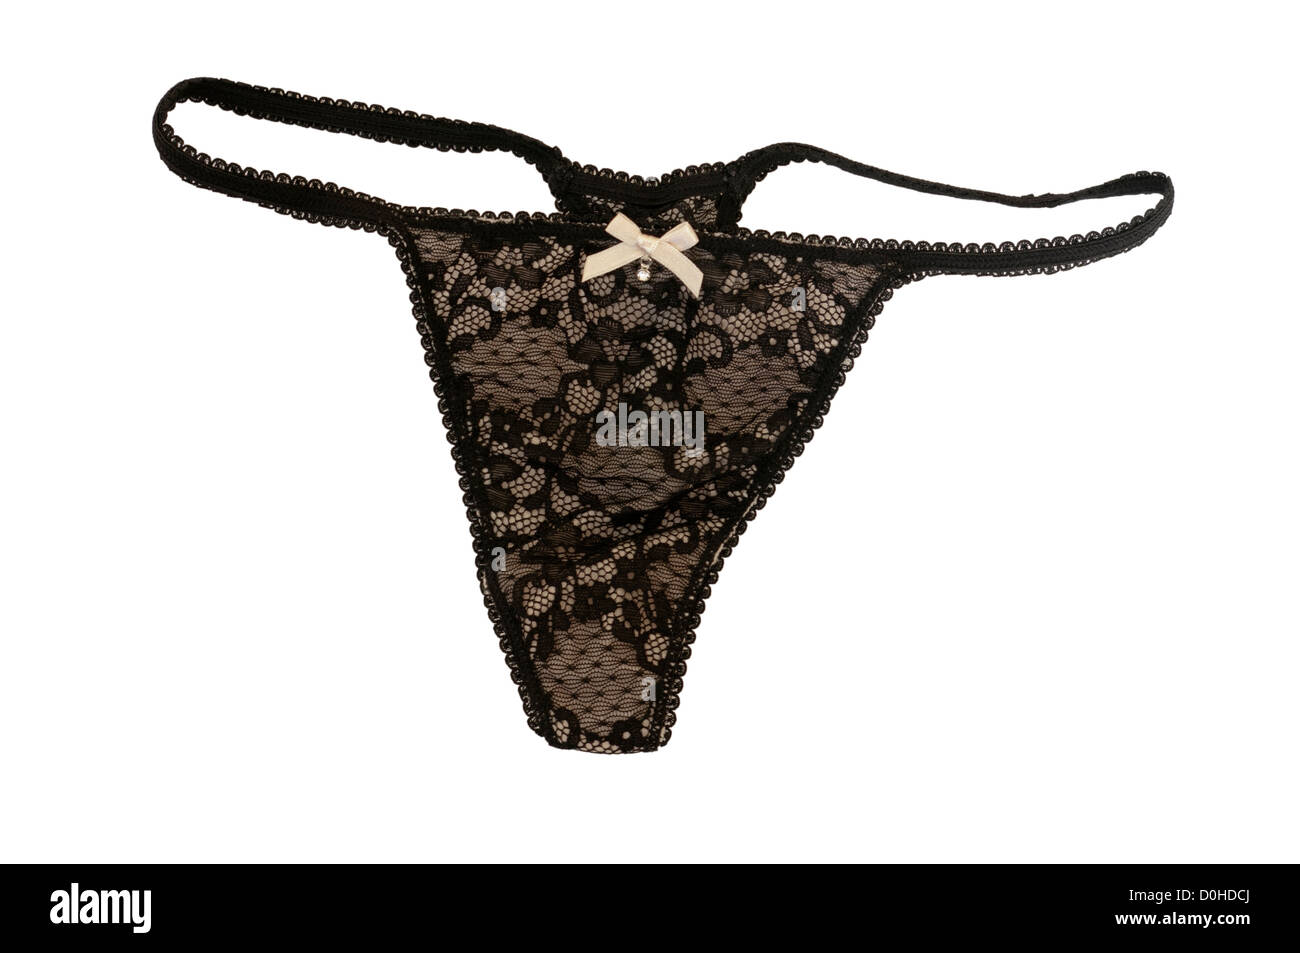 Ladies Lacy Black Thong Knickers Underwear Lingerie Stock Photo